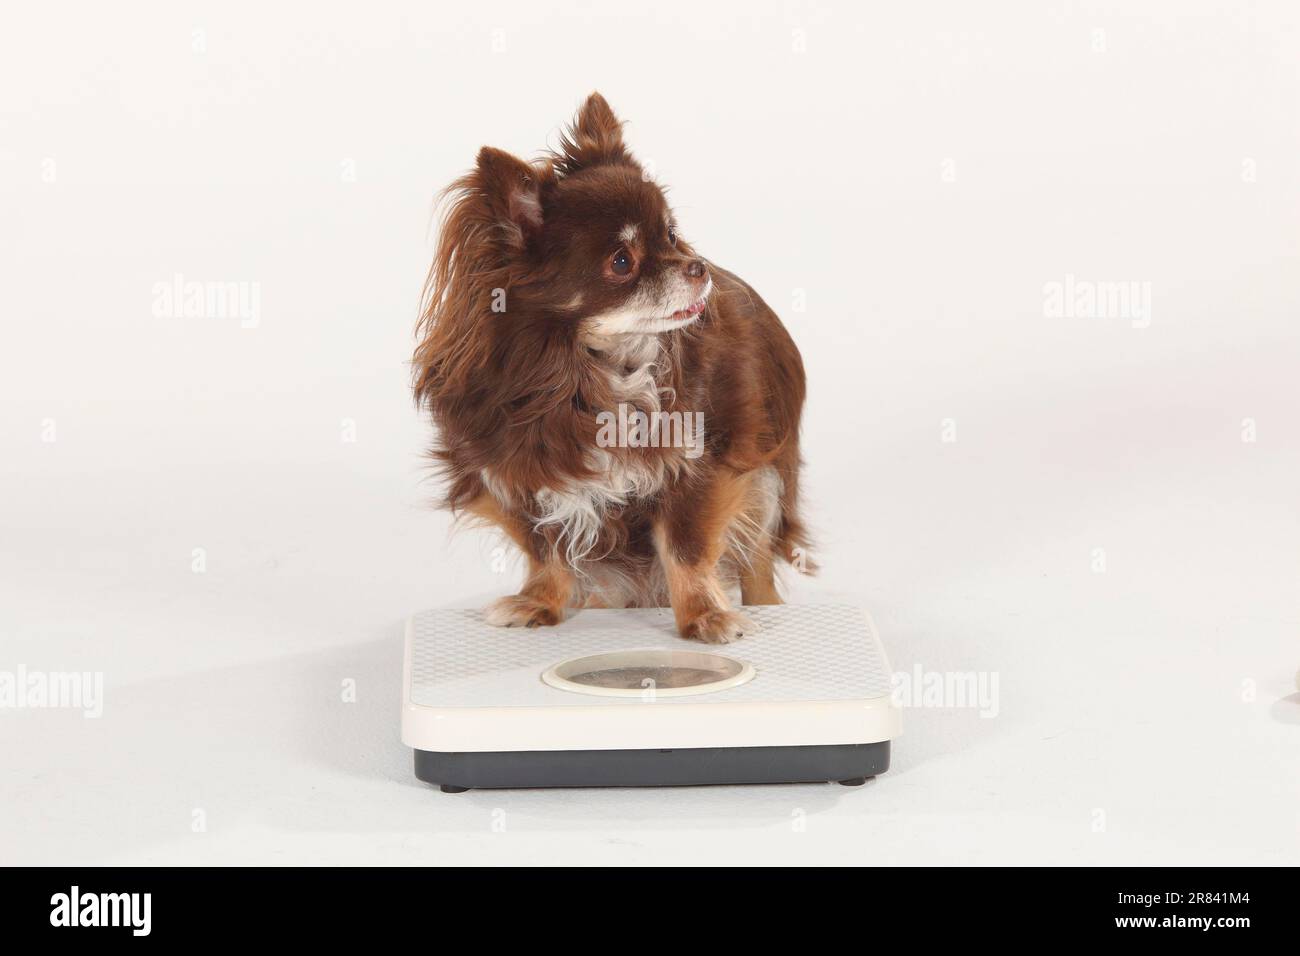 Chihuahua, long-haired, on scales Stock Photo